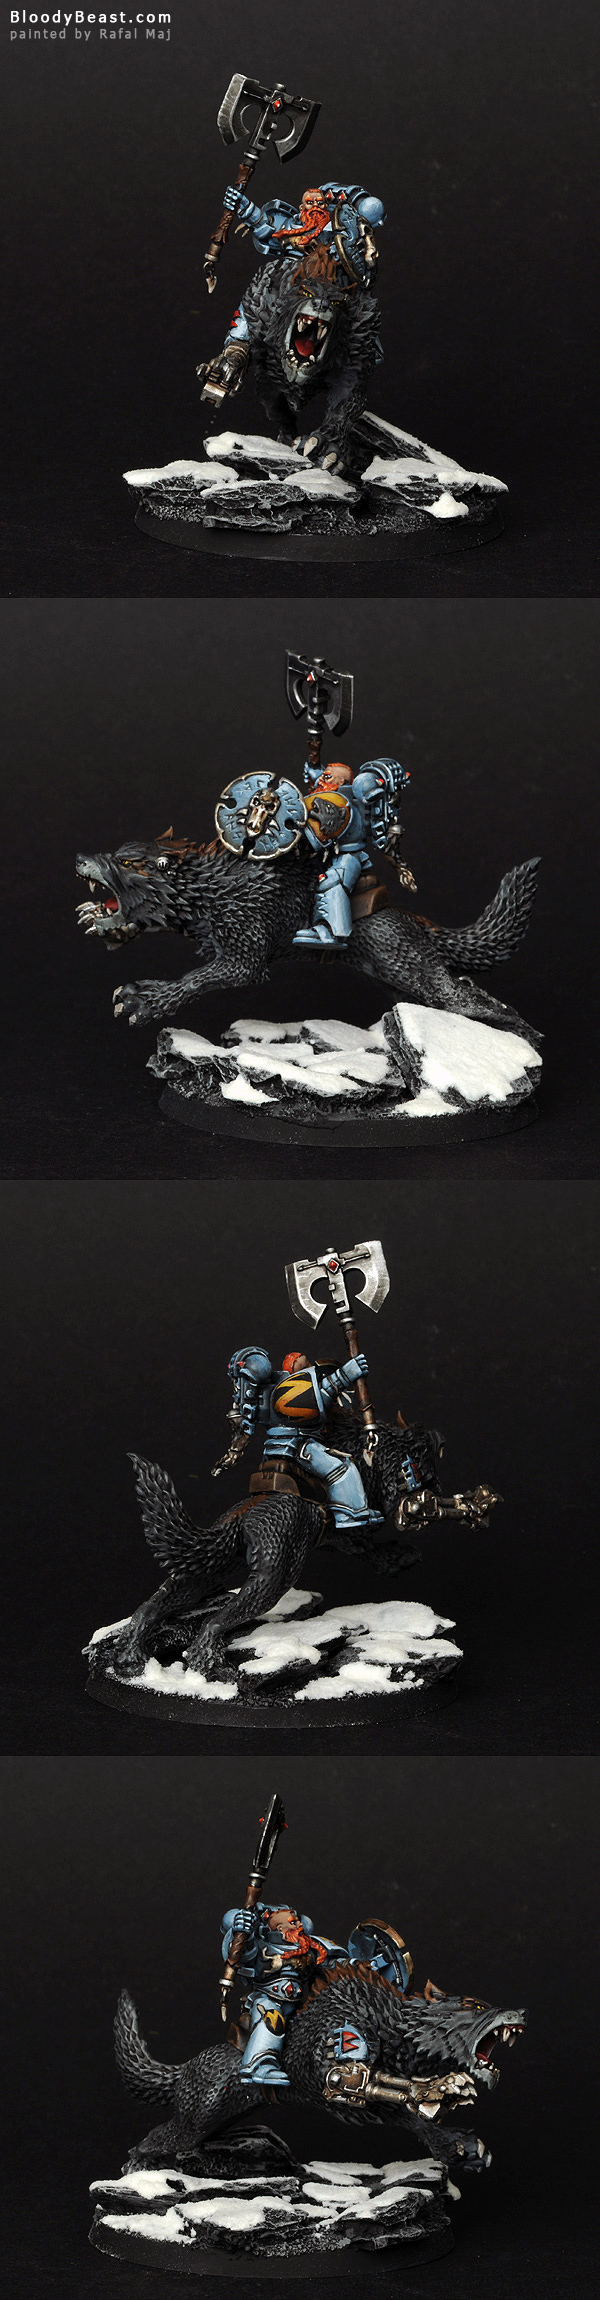 Space Wolves Thunderwolf Cavalry painted by Rafal Maj (BloodyBeast.com)